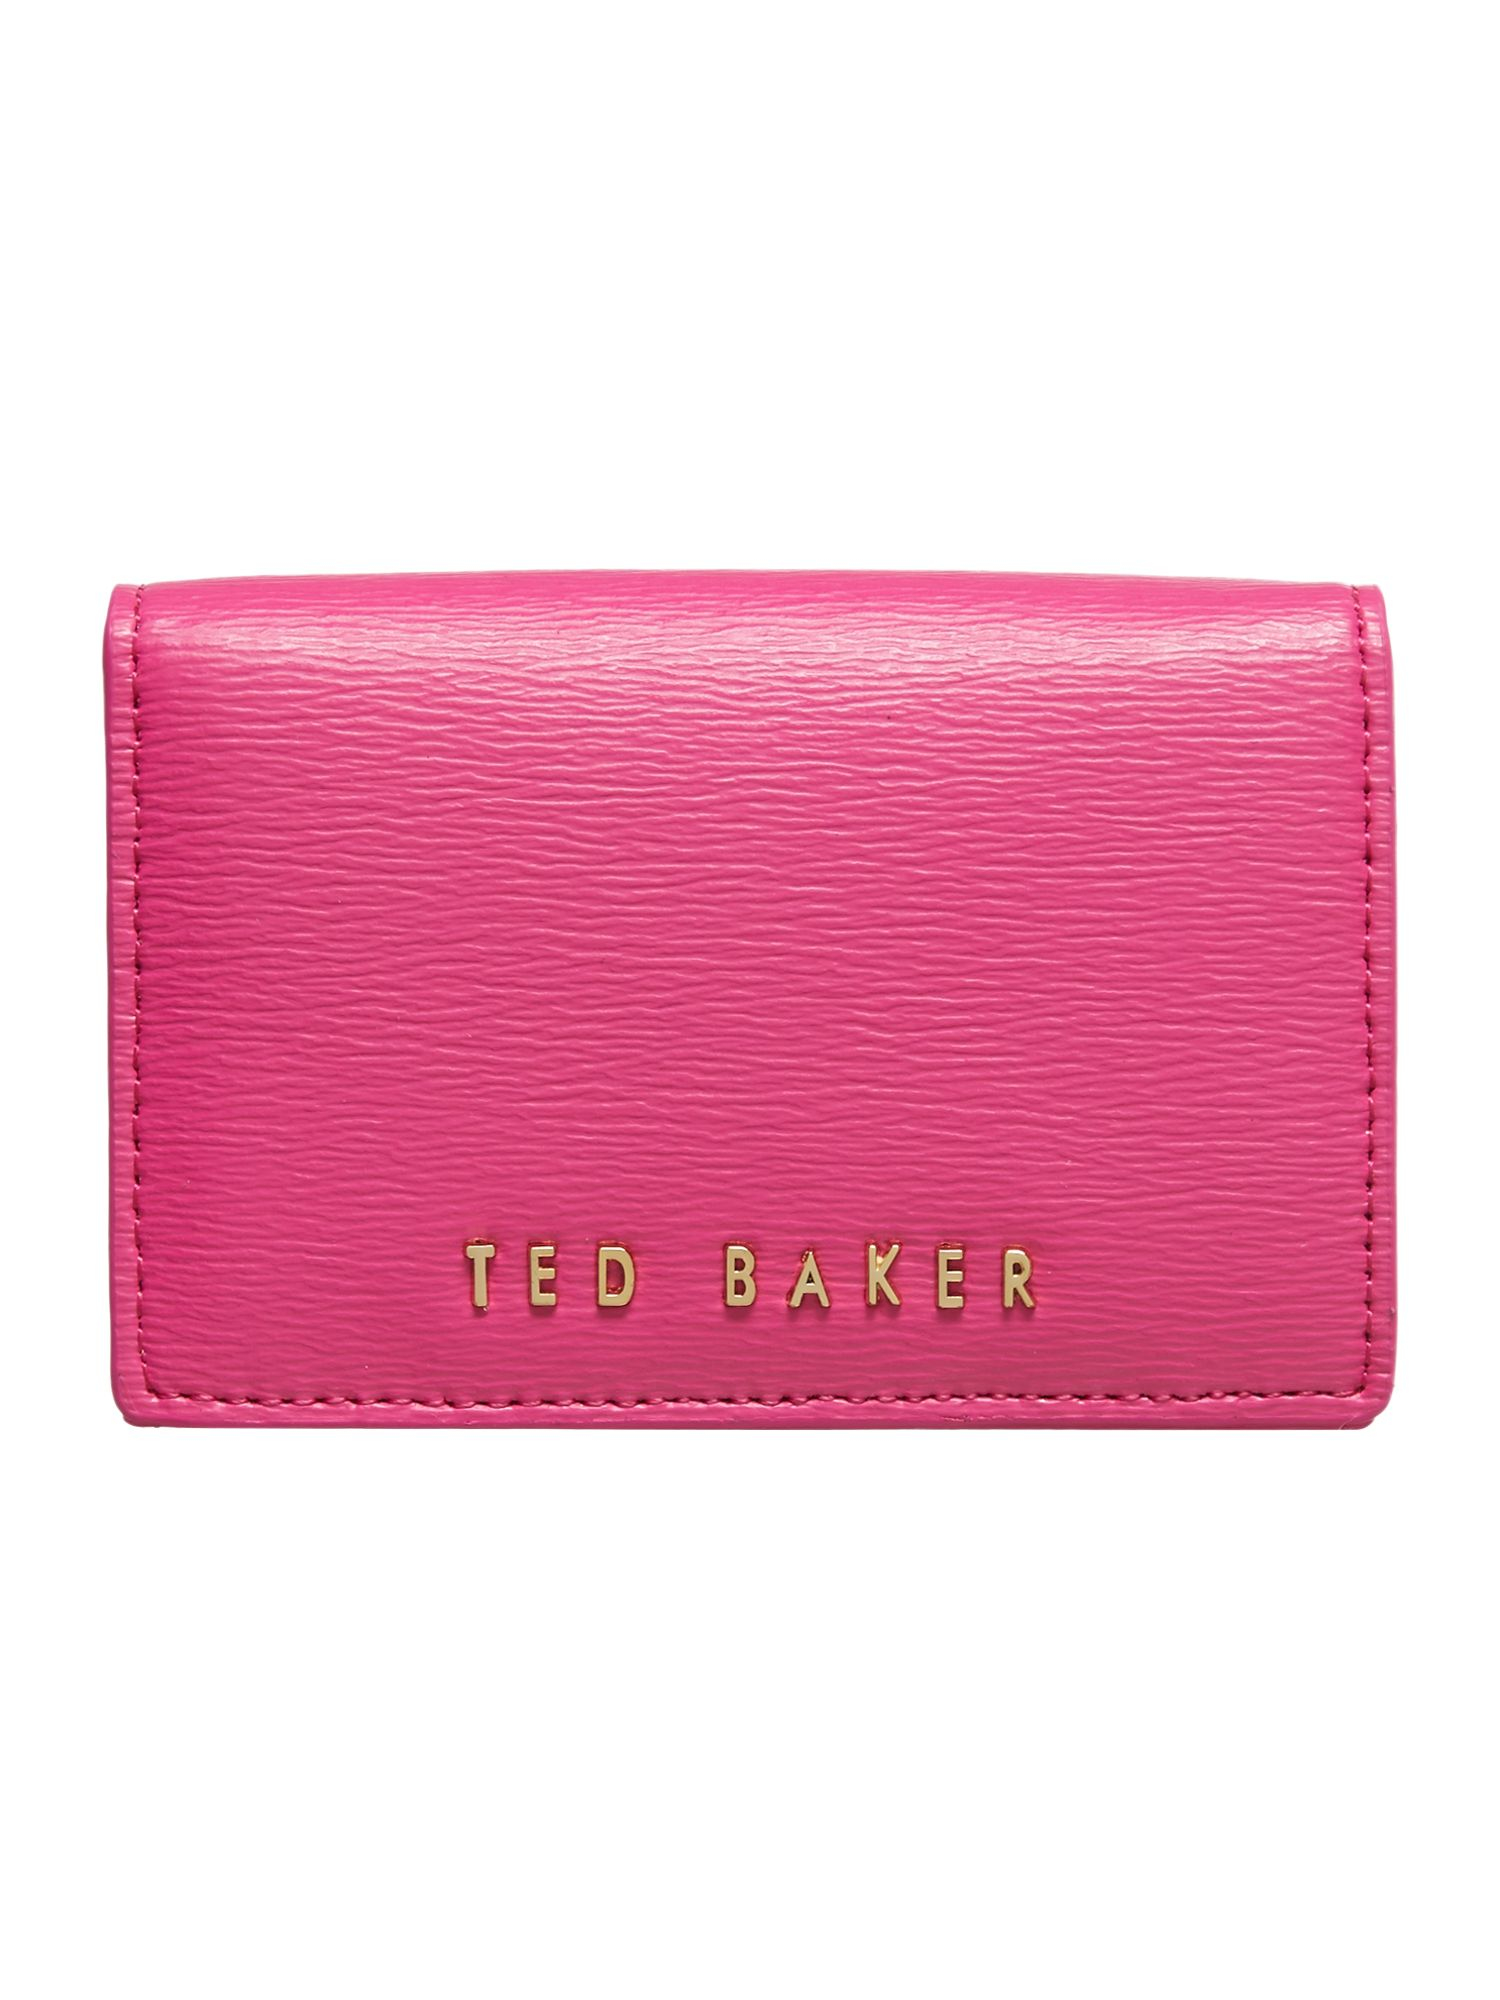 Ted baker Carley Pink Small Flap Over Purse in Pink | Lyst